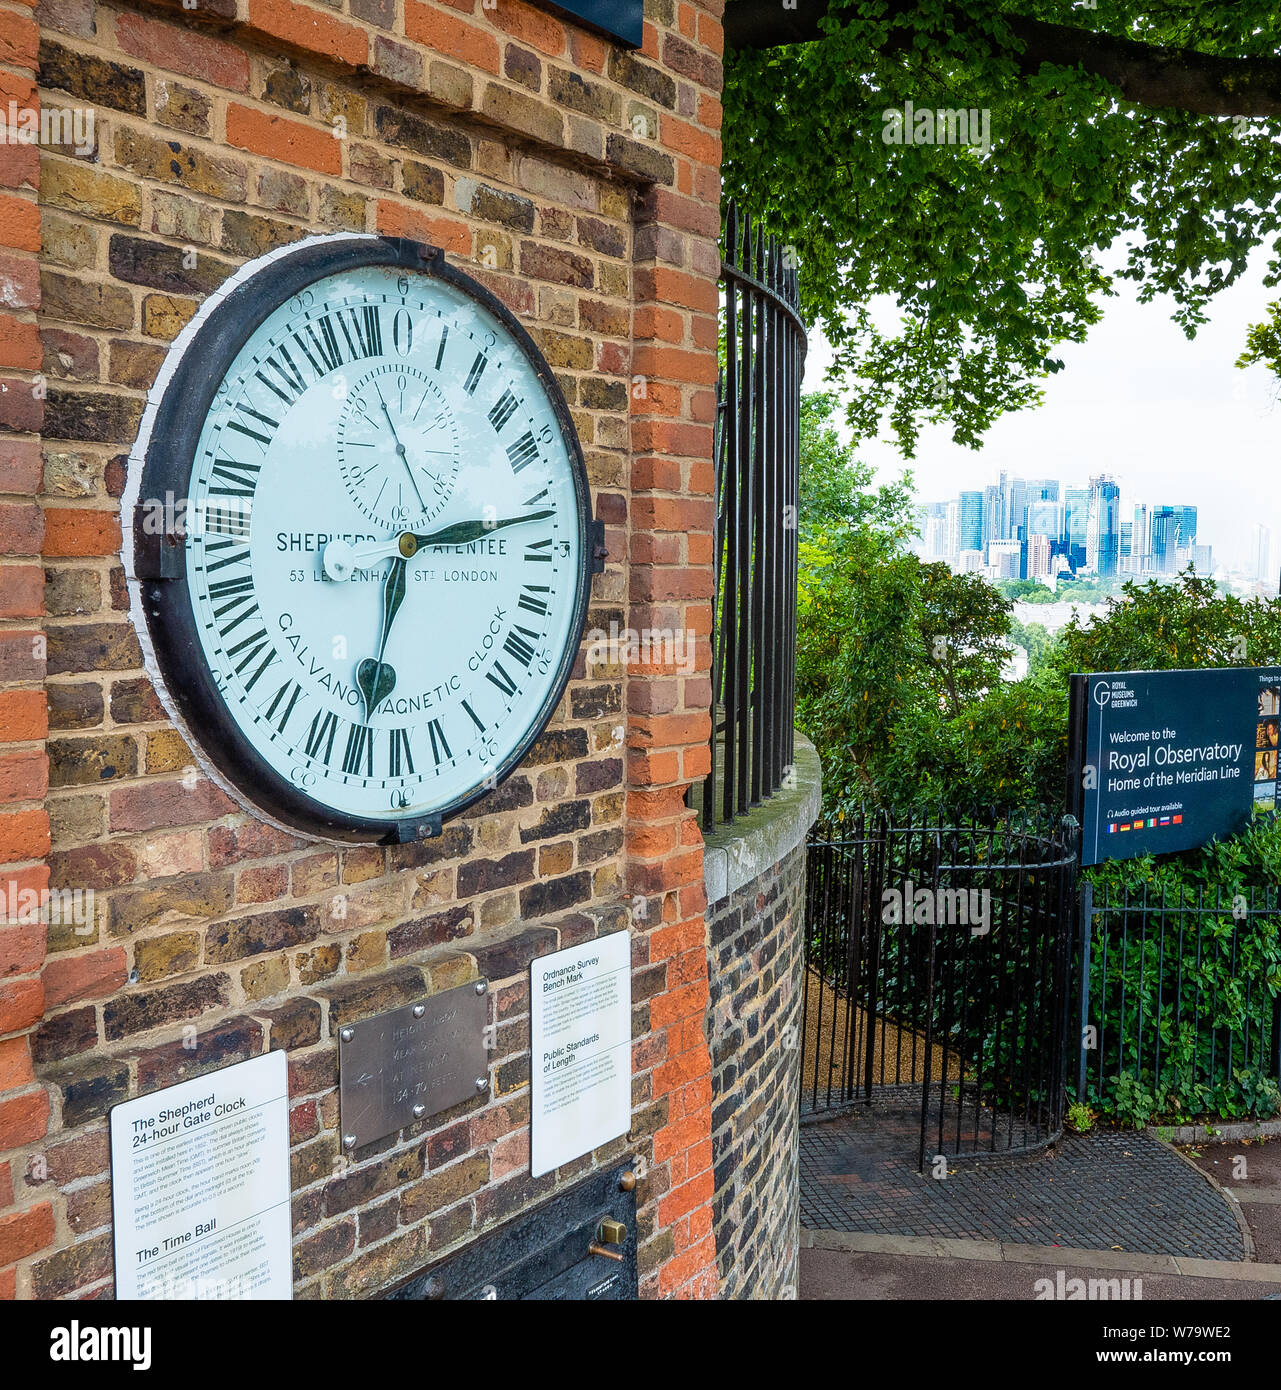 The Shepherd Gate 24 hour electric clock on the walls of Greenwich Observatory in London UK Stock Photo